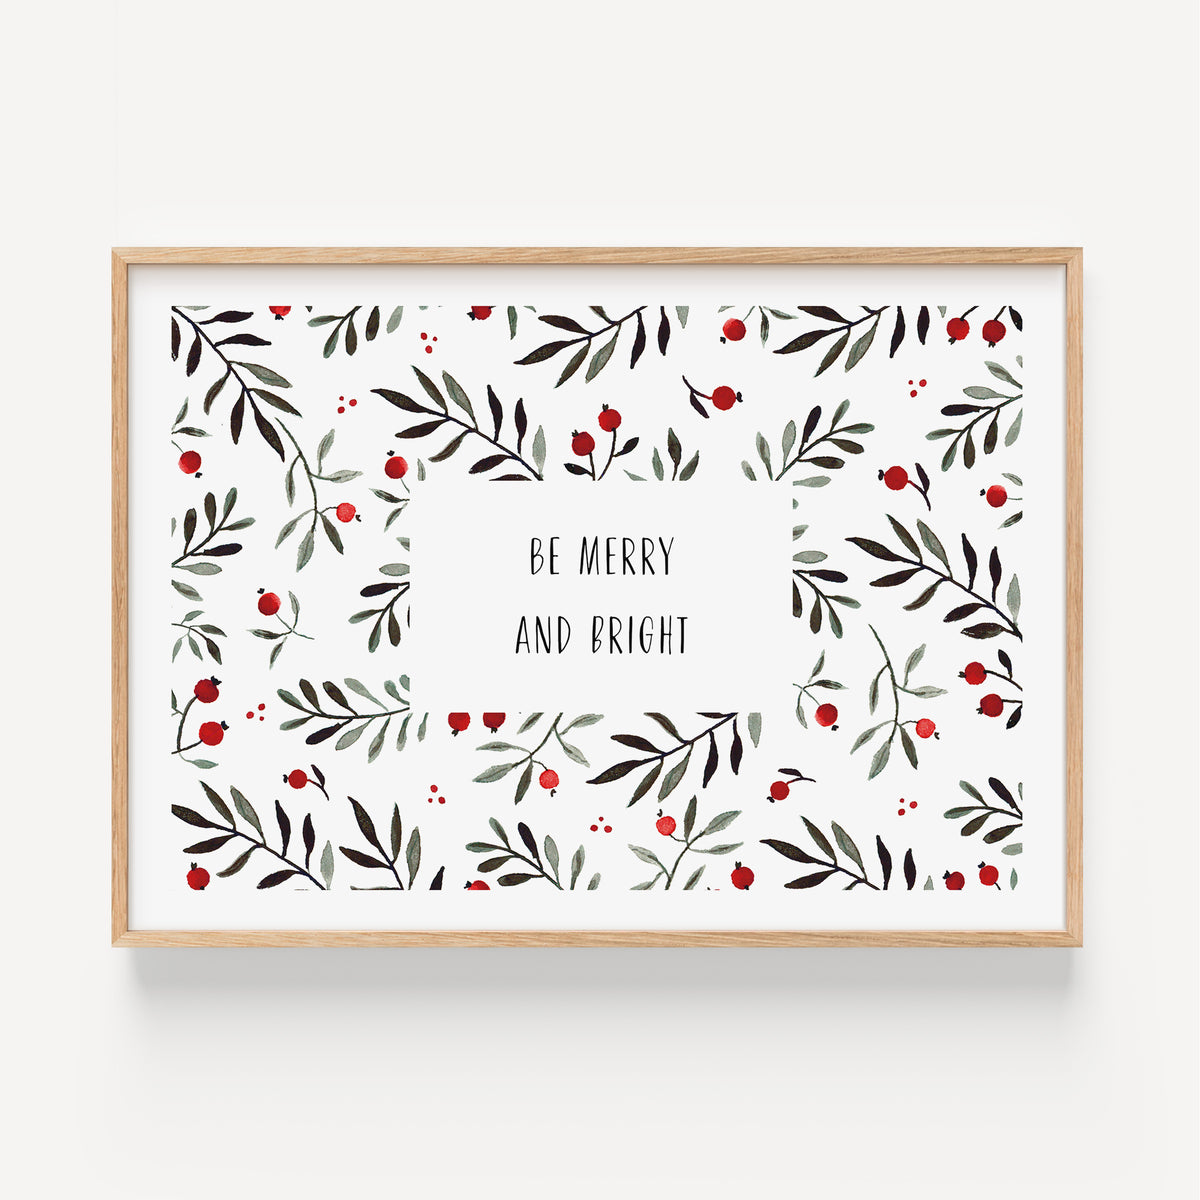 Art Print - Be merry and bright